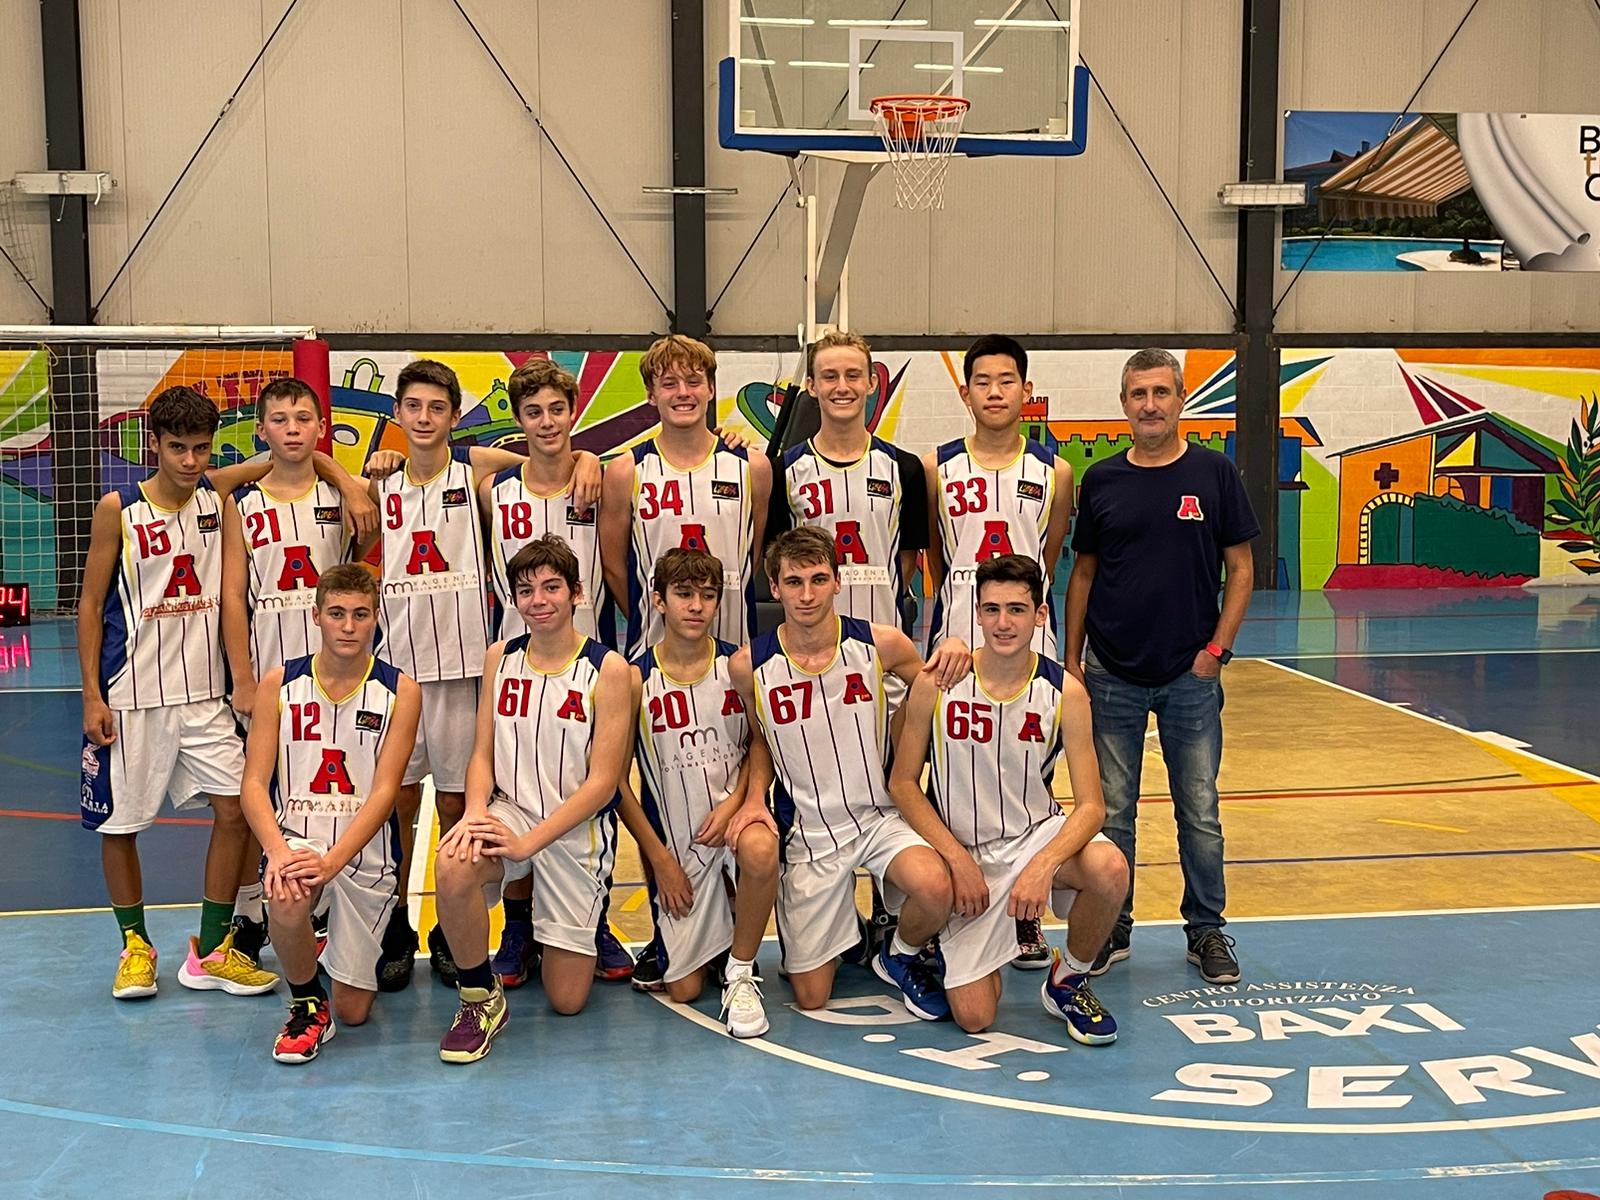 under 15 gold: AreaPro2020 vince con Gators